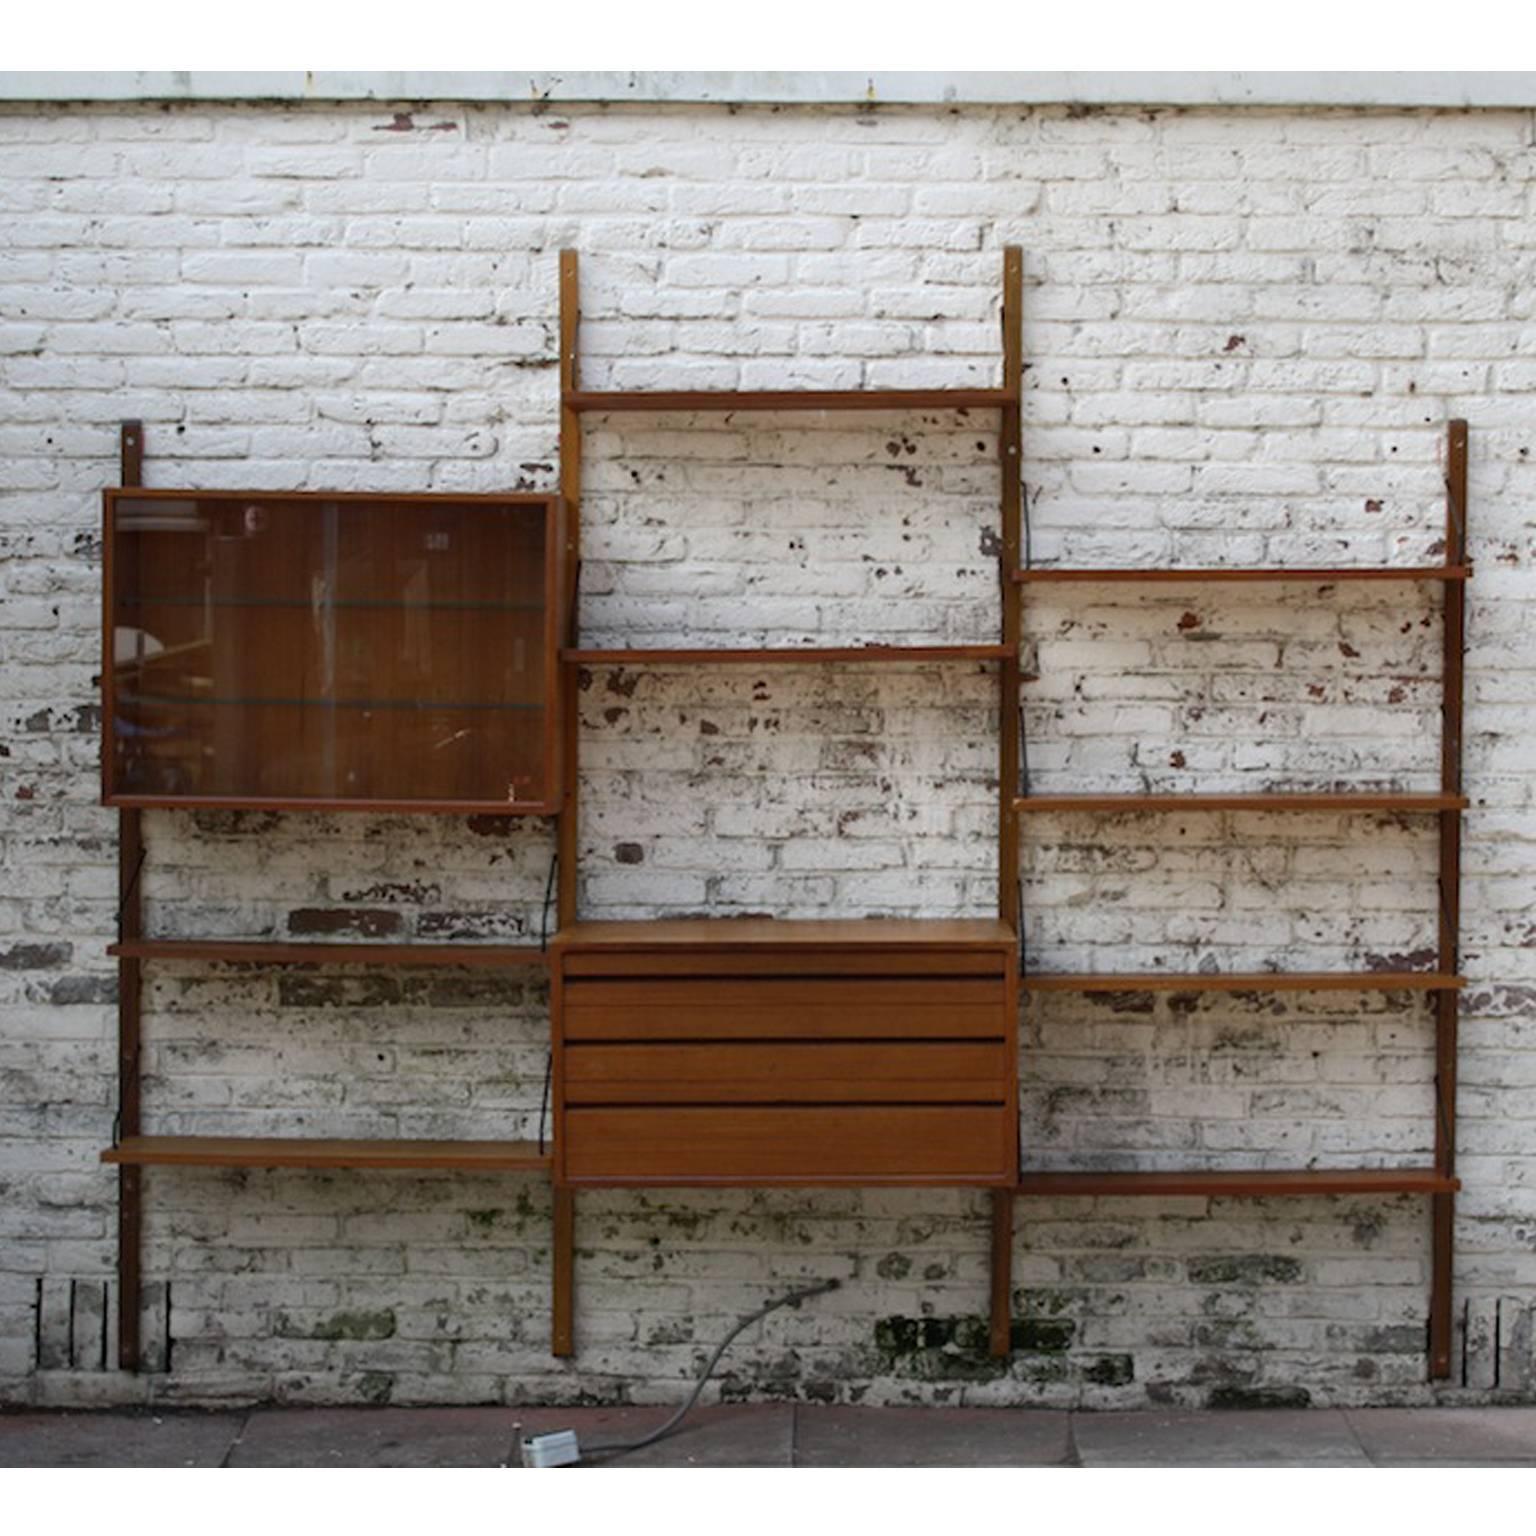 Beautiful wall system or shelving unit by the famous Poul Cadovius from Denmark.

Cadovius started his own company called 